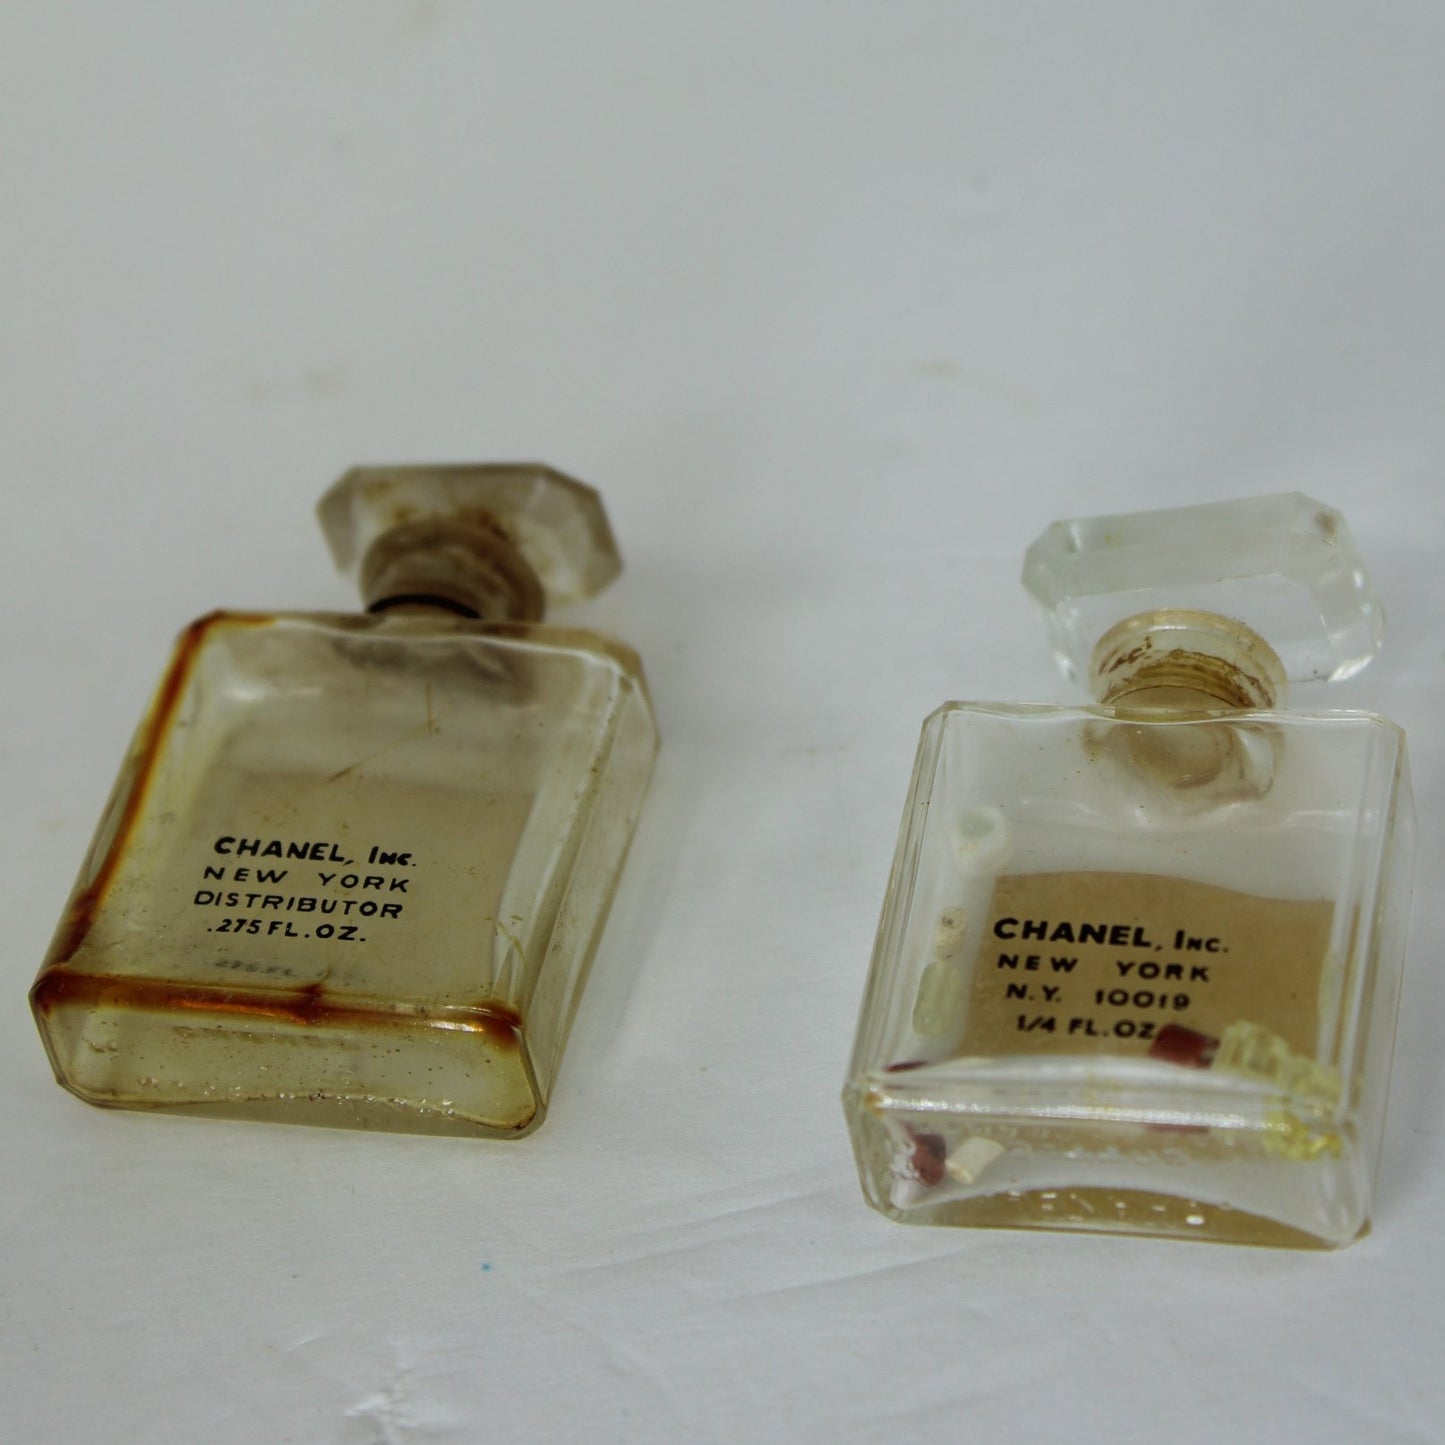 Sold at Auction: Chanel No. 5 in Original Box 5 Ounces, and